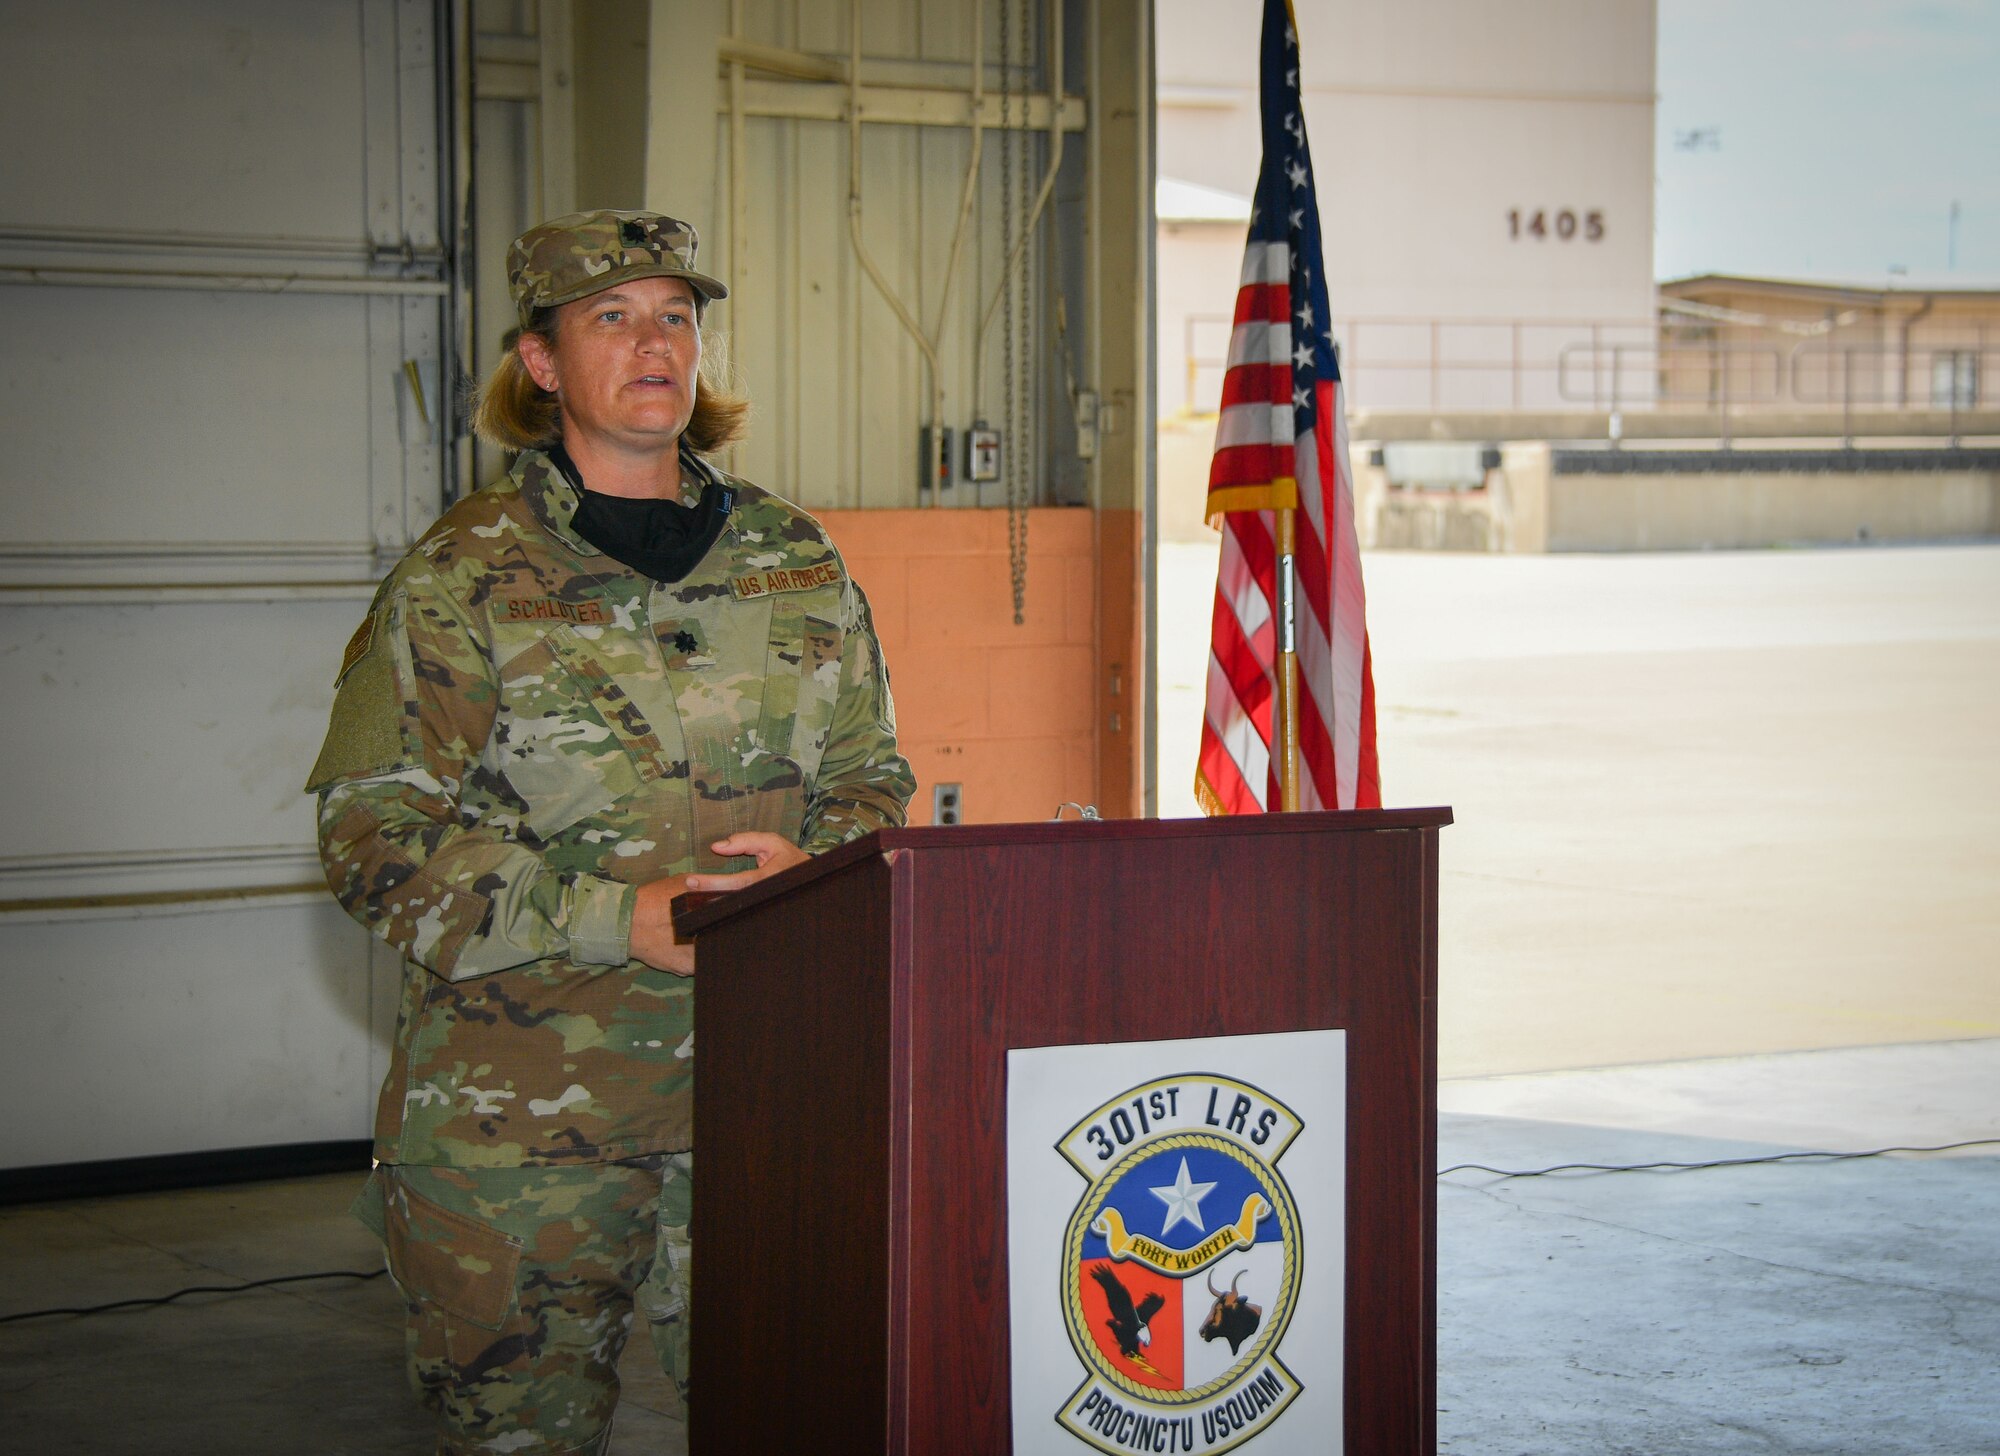 Lt. Col. Farrah Schluter, 301st Fighter Wing Logistics Readiness Squadron commander, addresses her Airmen during the 301st FW LRS assumption of command ceremony, September 13, 2020, at U.S. Naval Air Station Joint Reserve Base Fort Worth, Texas. She is responsible for 127 Traditional Reservists, Air Reserve Technicians, Active Guard Reserves, and civilian personnel. She is responsible for logistics plans, vehicle operations, vehicle maintenance, fuels, supply, and traffic management. (U.S. Air Force photo by Staff Sgt. Randall Moose)